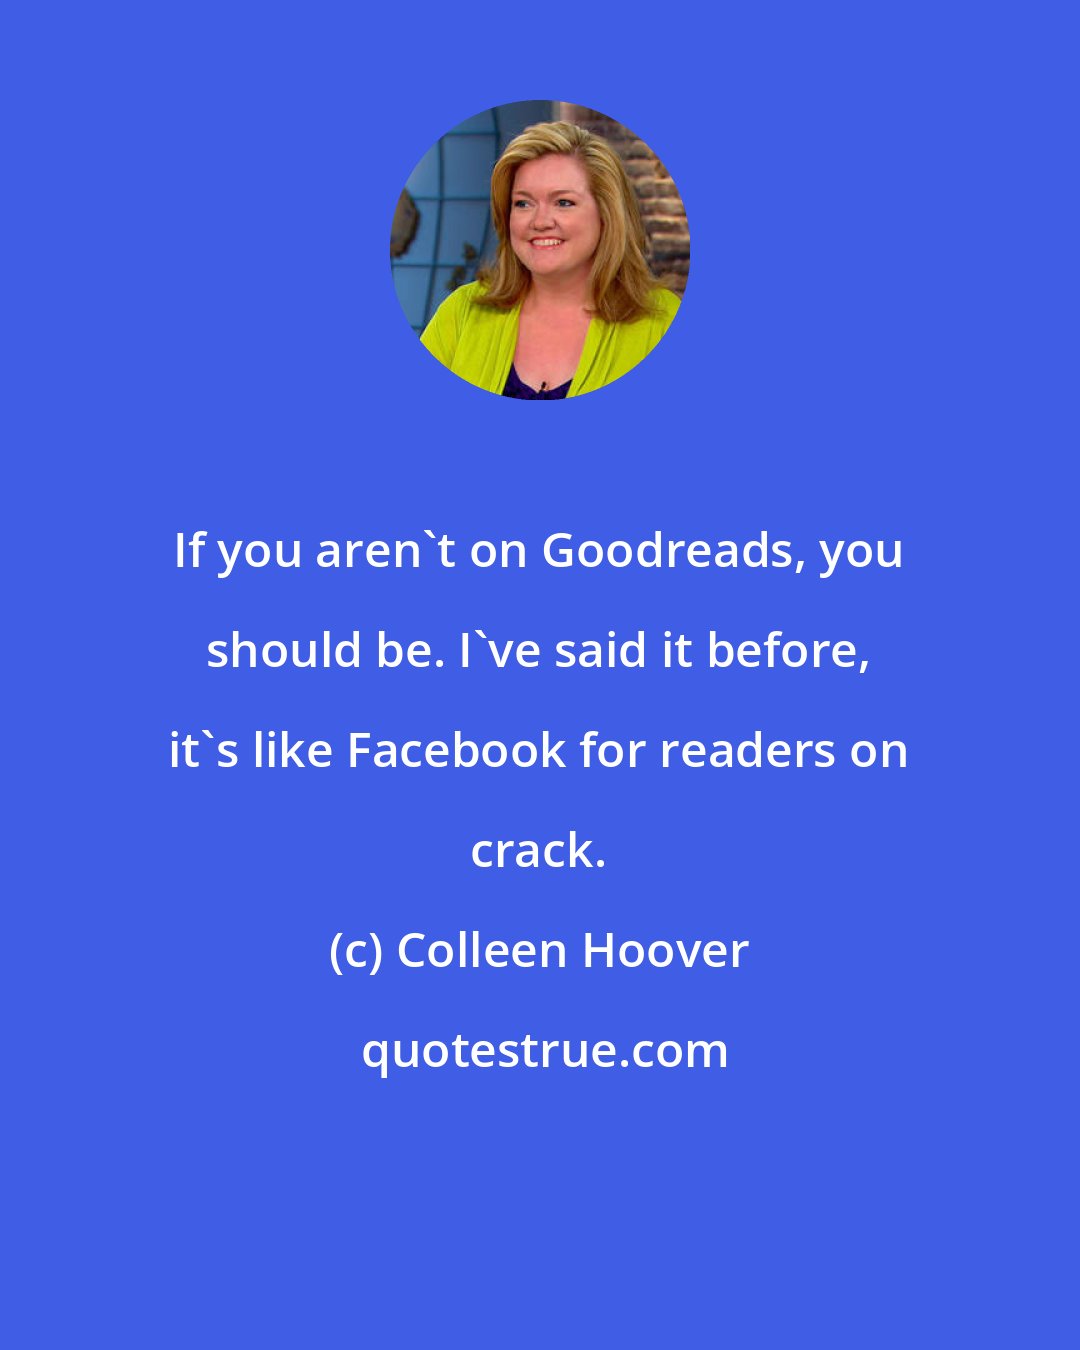 Colleen Hoover: If you aren't on Goodreads, you should be. I've said it before, it's like Facebook for readers on crack.